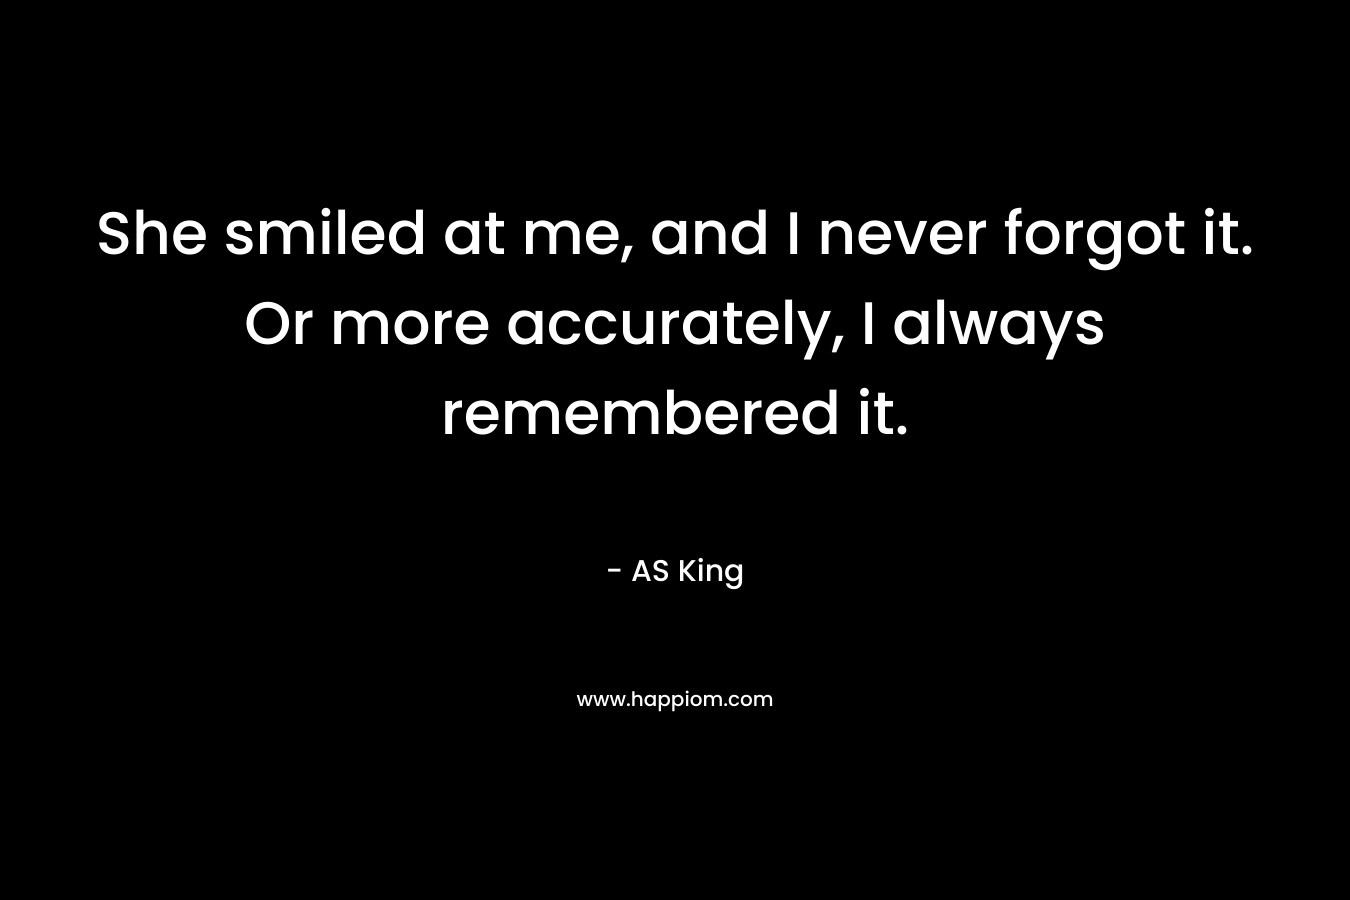 She smiled at me, and I never forgot it. Or more accurately, I always remembered it. – AS King